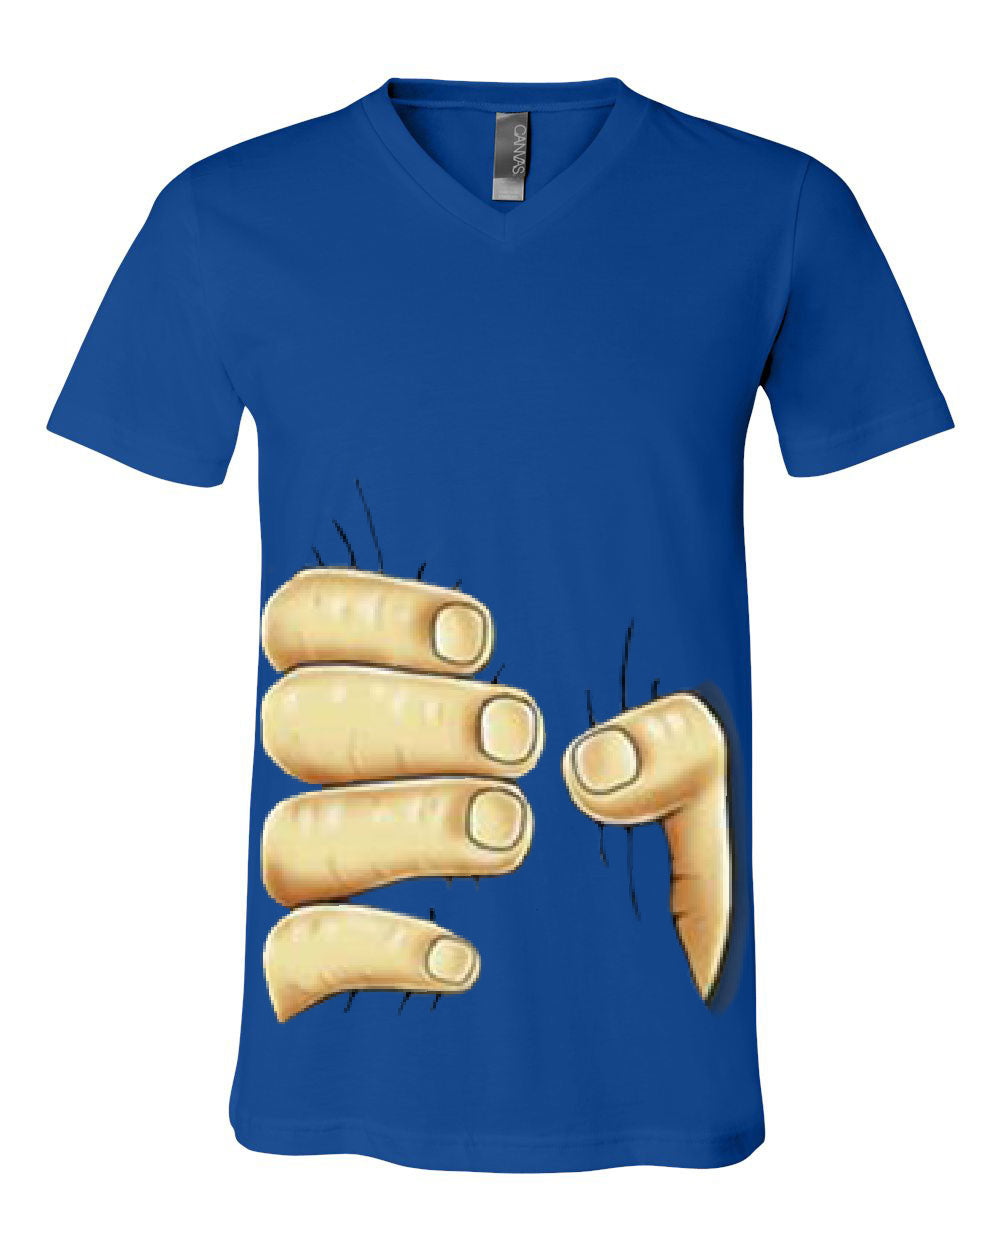 Giant Hand Squeezing V-Neck T-Shirt Funny Male Hand Grabbing Tee | eBay